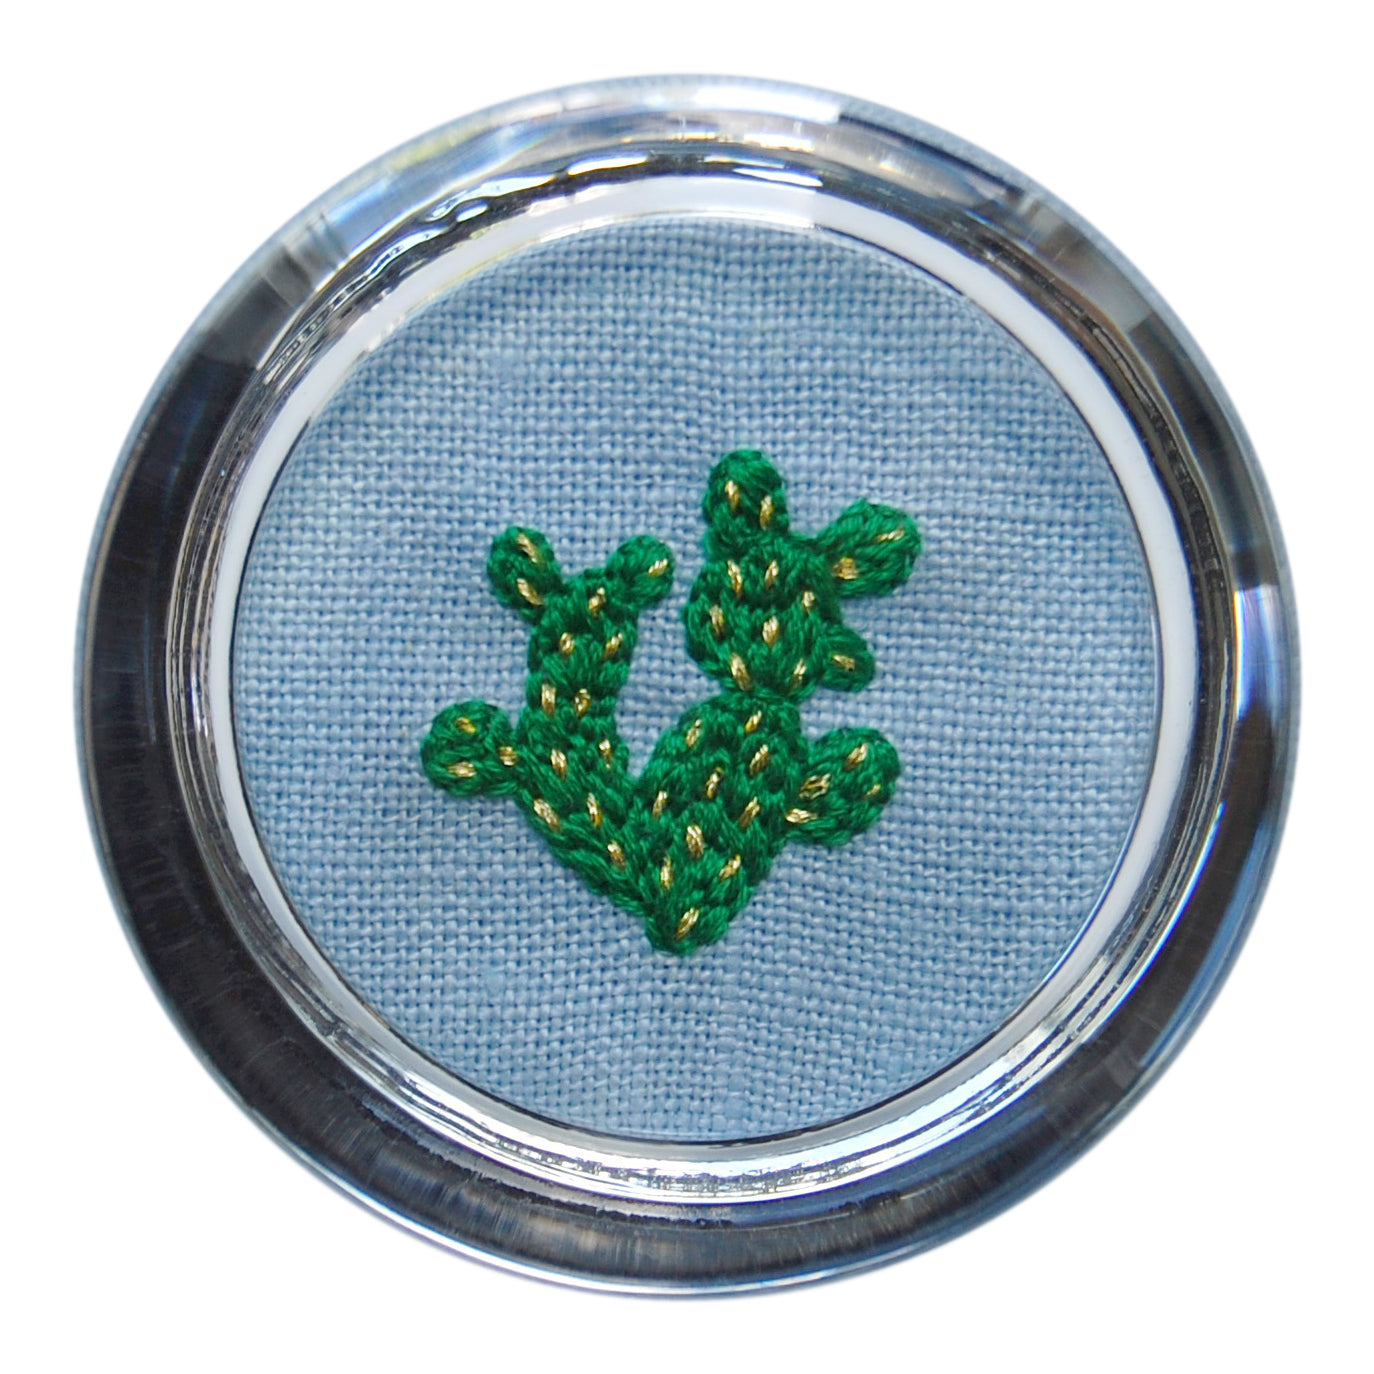 Green Paddle Cactus with Gold Needles on Blue Linen Hand Embroidered Paperweight